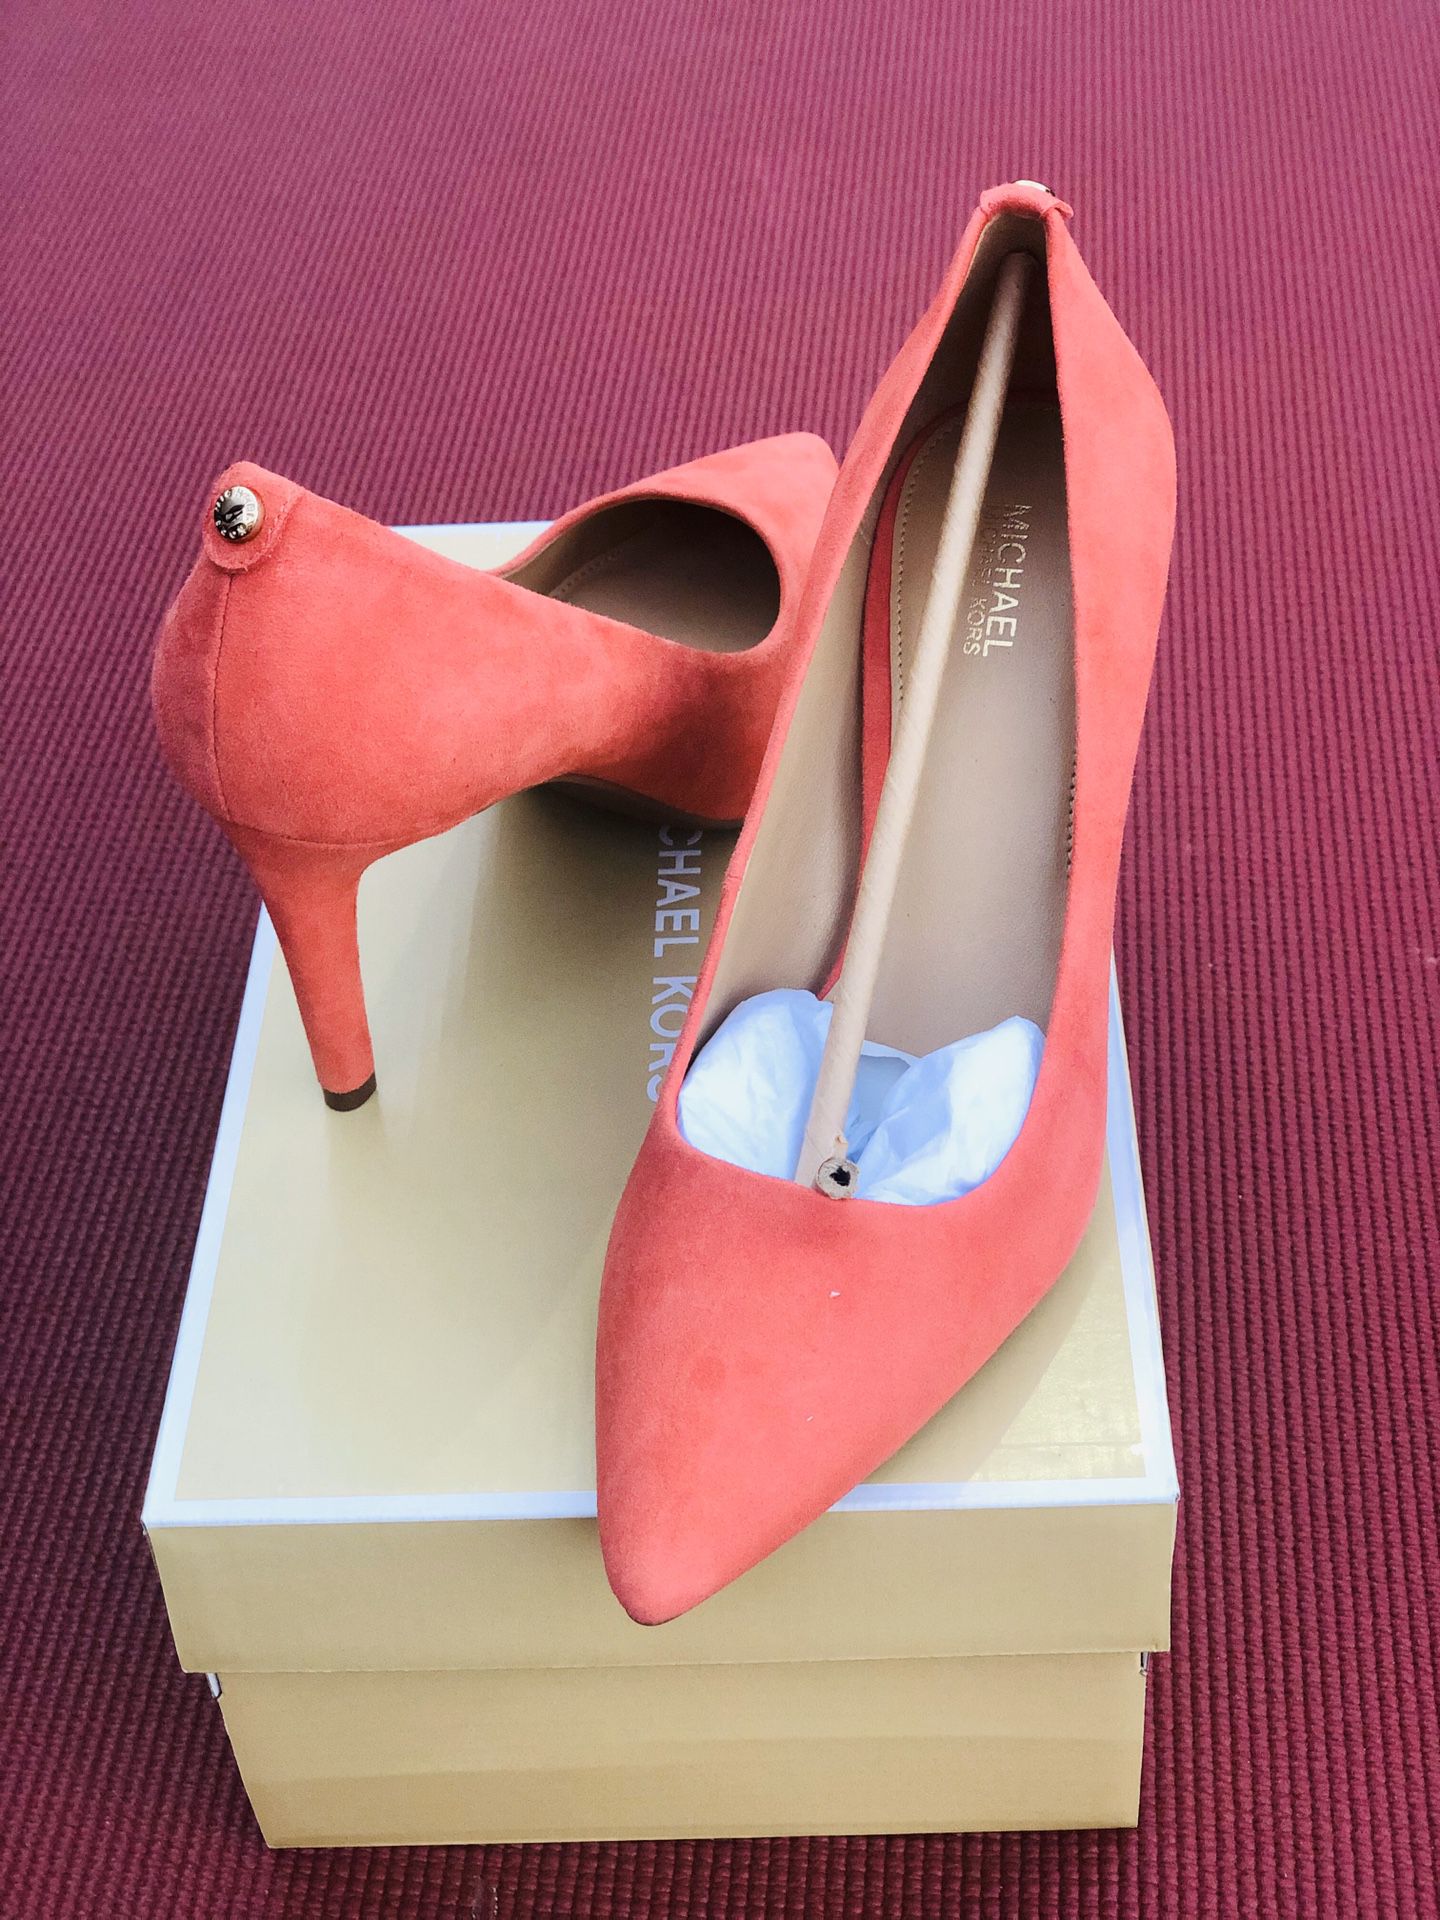 Mike kors shoes new size 9